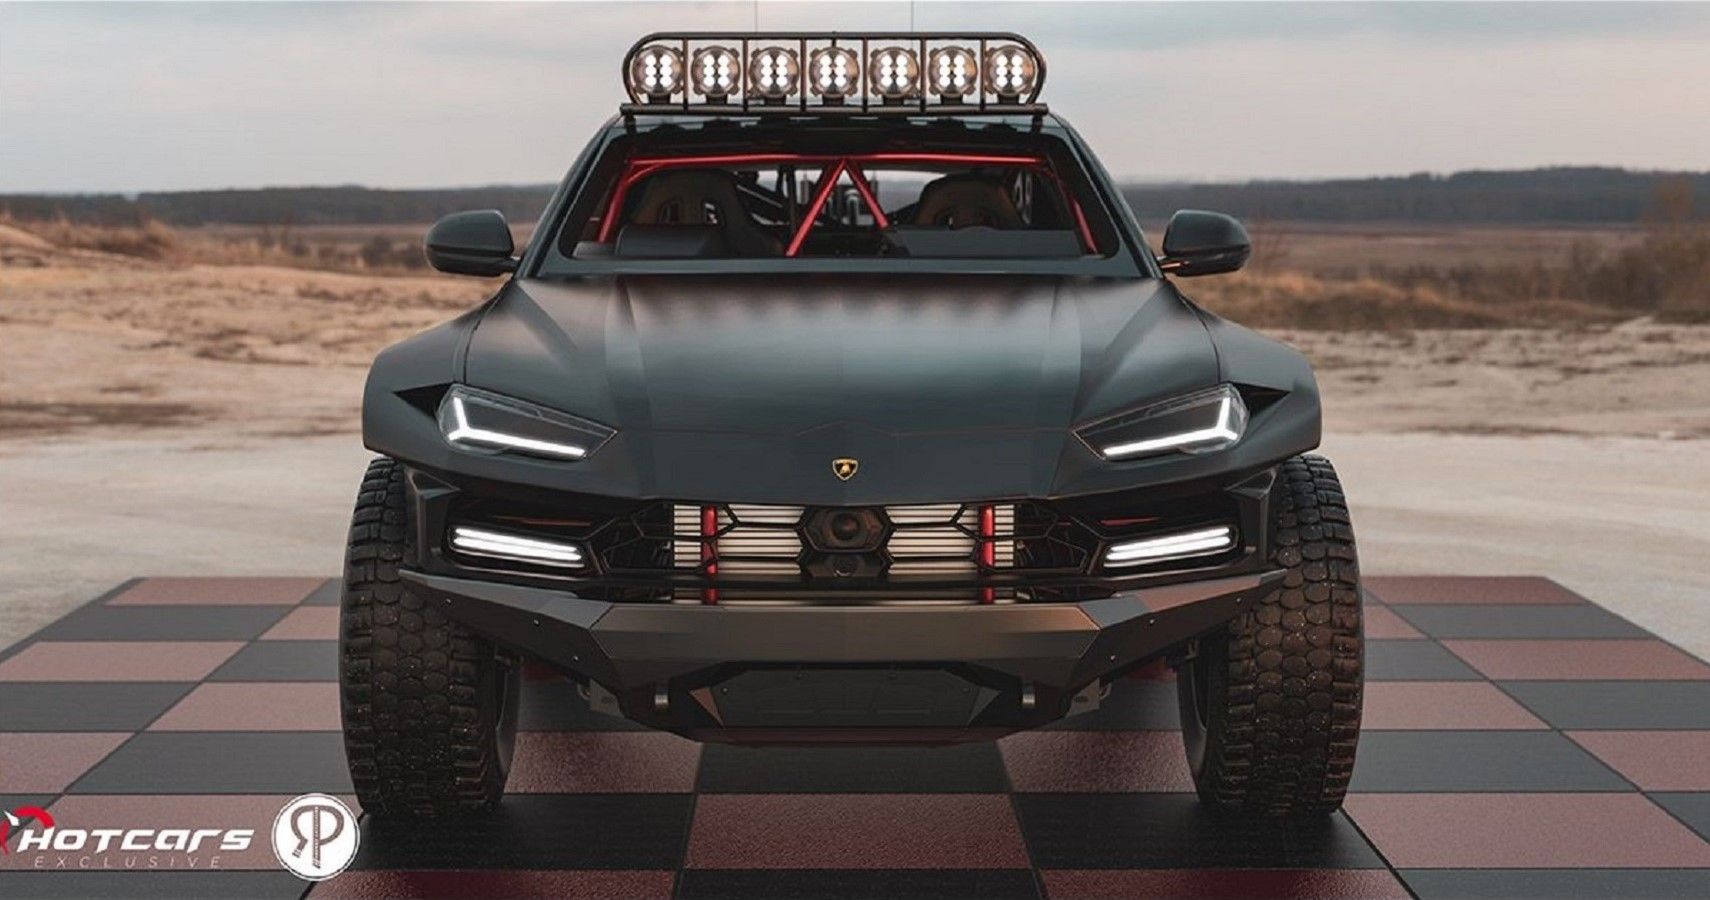 This Lamborghini Urus Baja Racer Render Is Ready For Some Off-Road Action